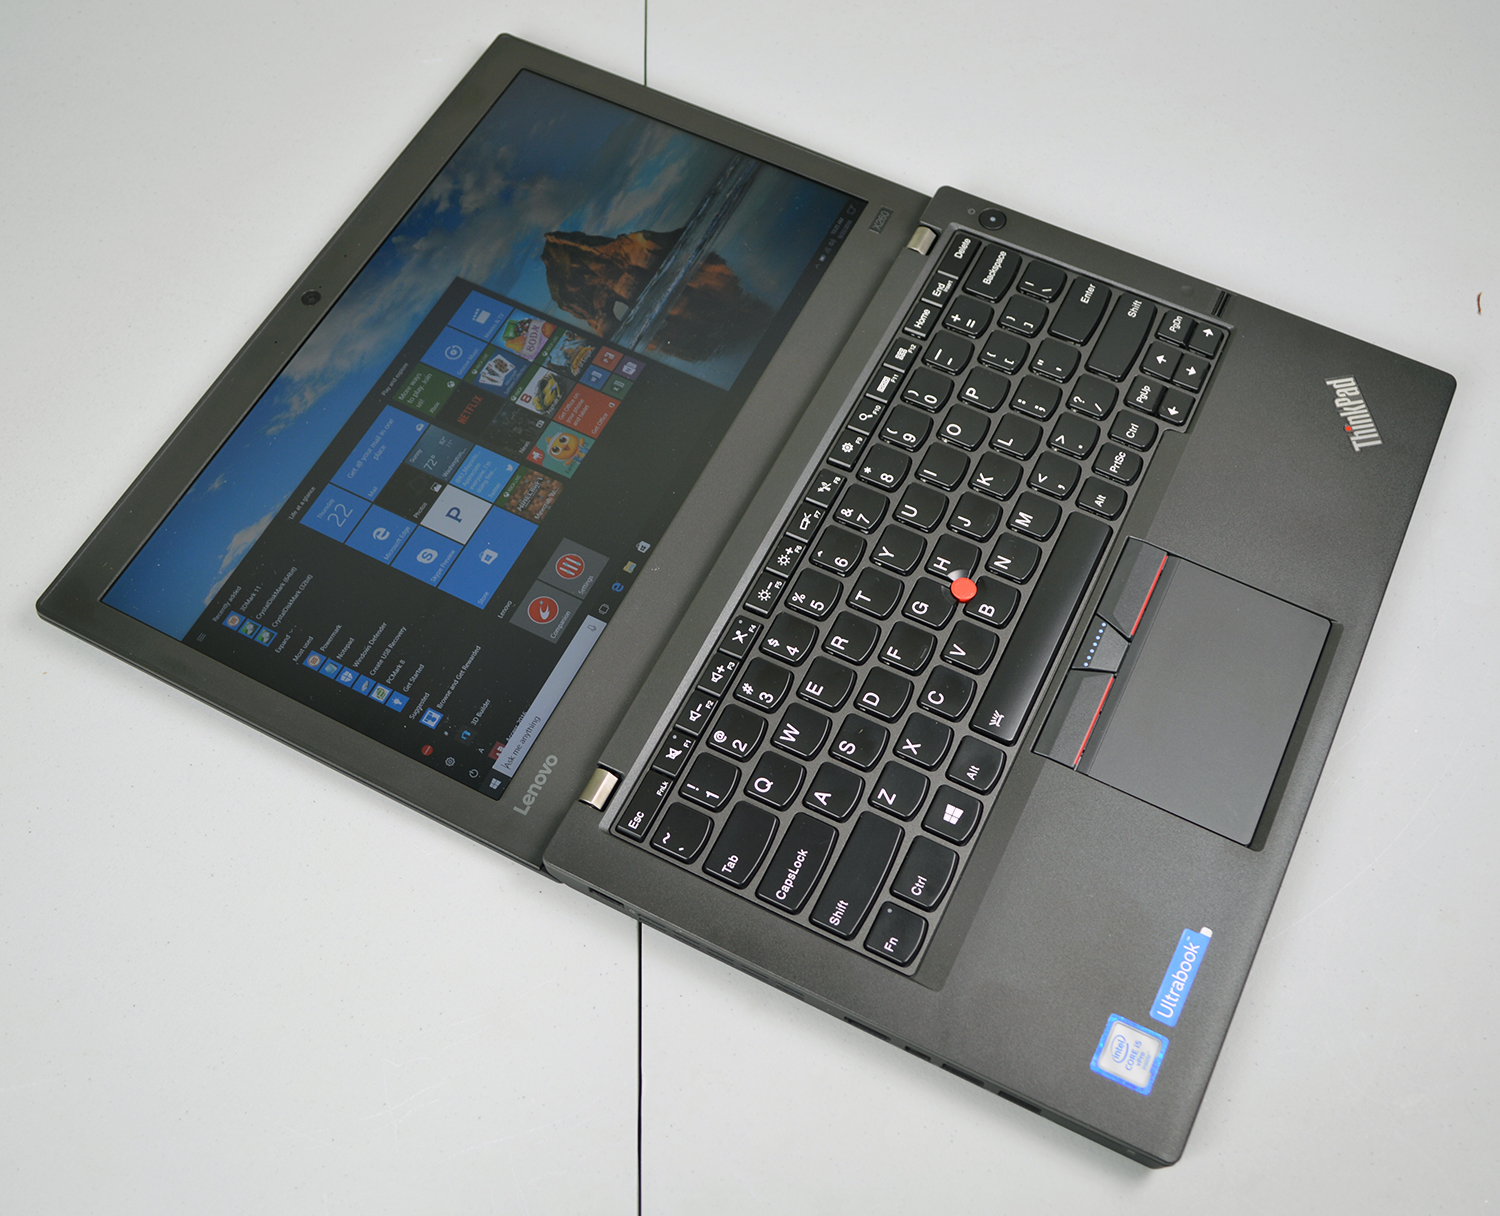 Lenovo ThinkPad X260 Review: Balanced for Business Travelers